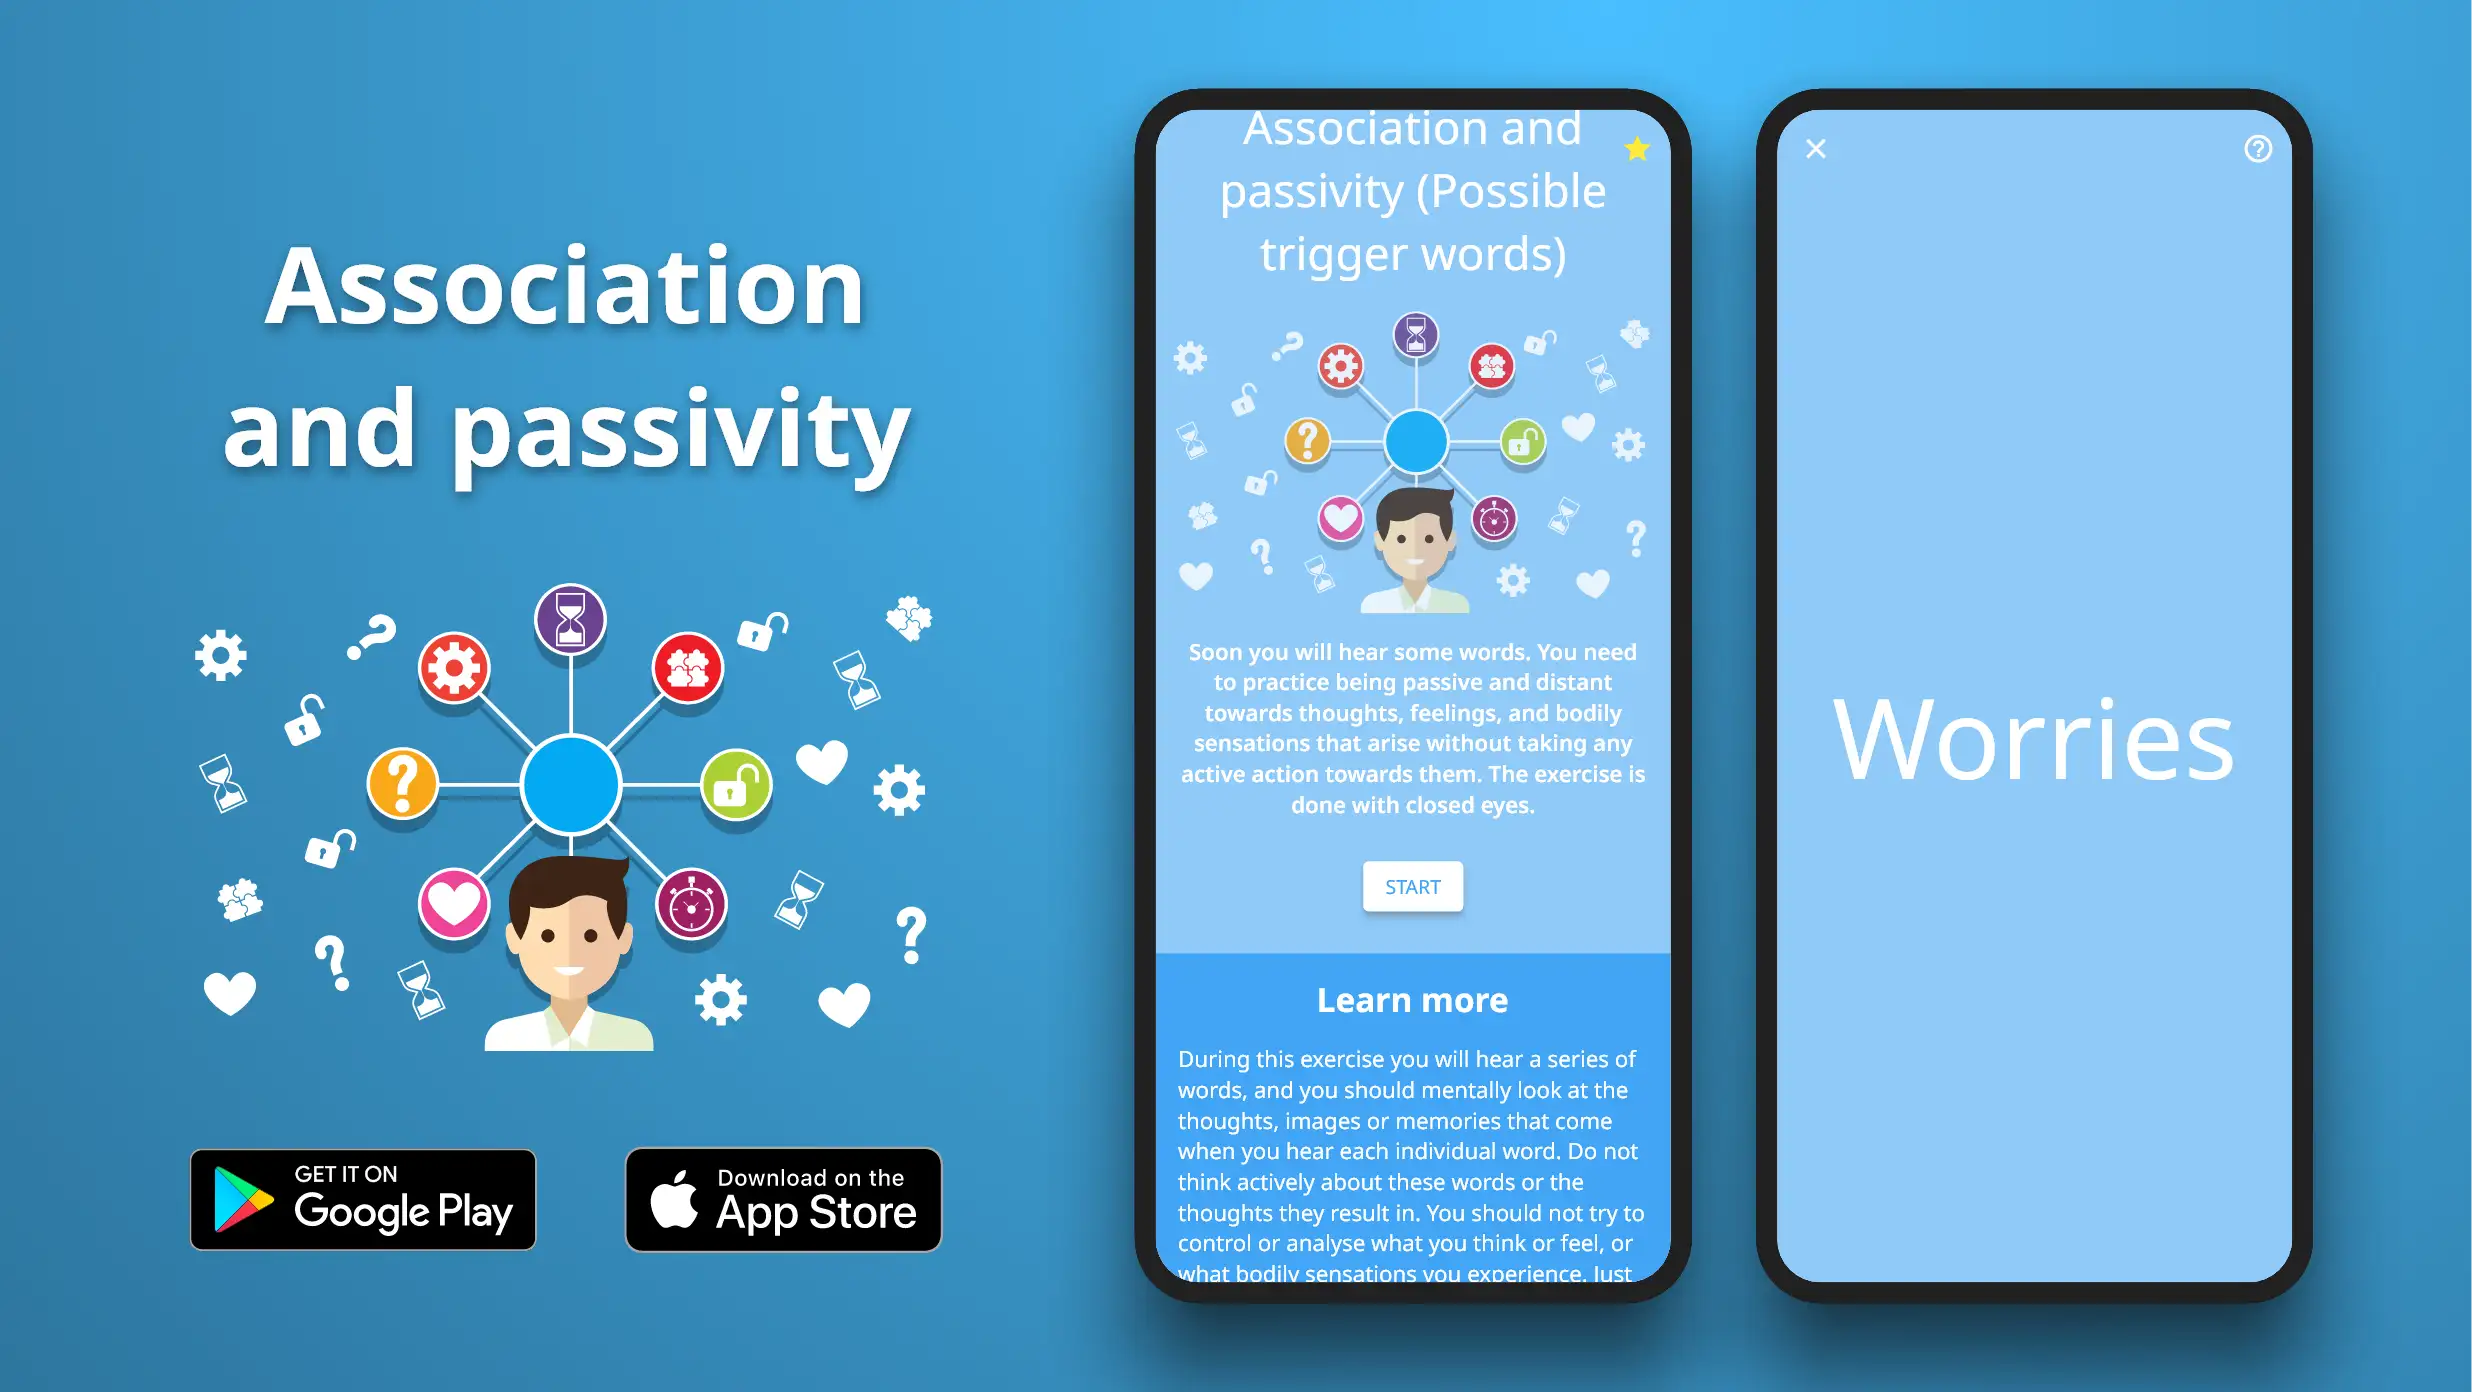 Association and passivity exercise in the Meta Learn app.